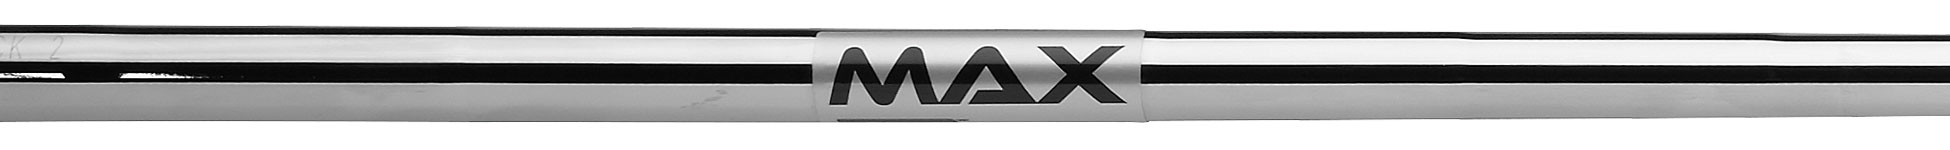 The TaylorMade SIM2 Max Irons - picture of the KBS MAX 85 Shaft.